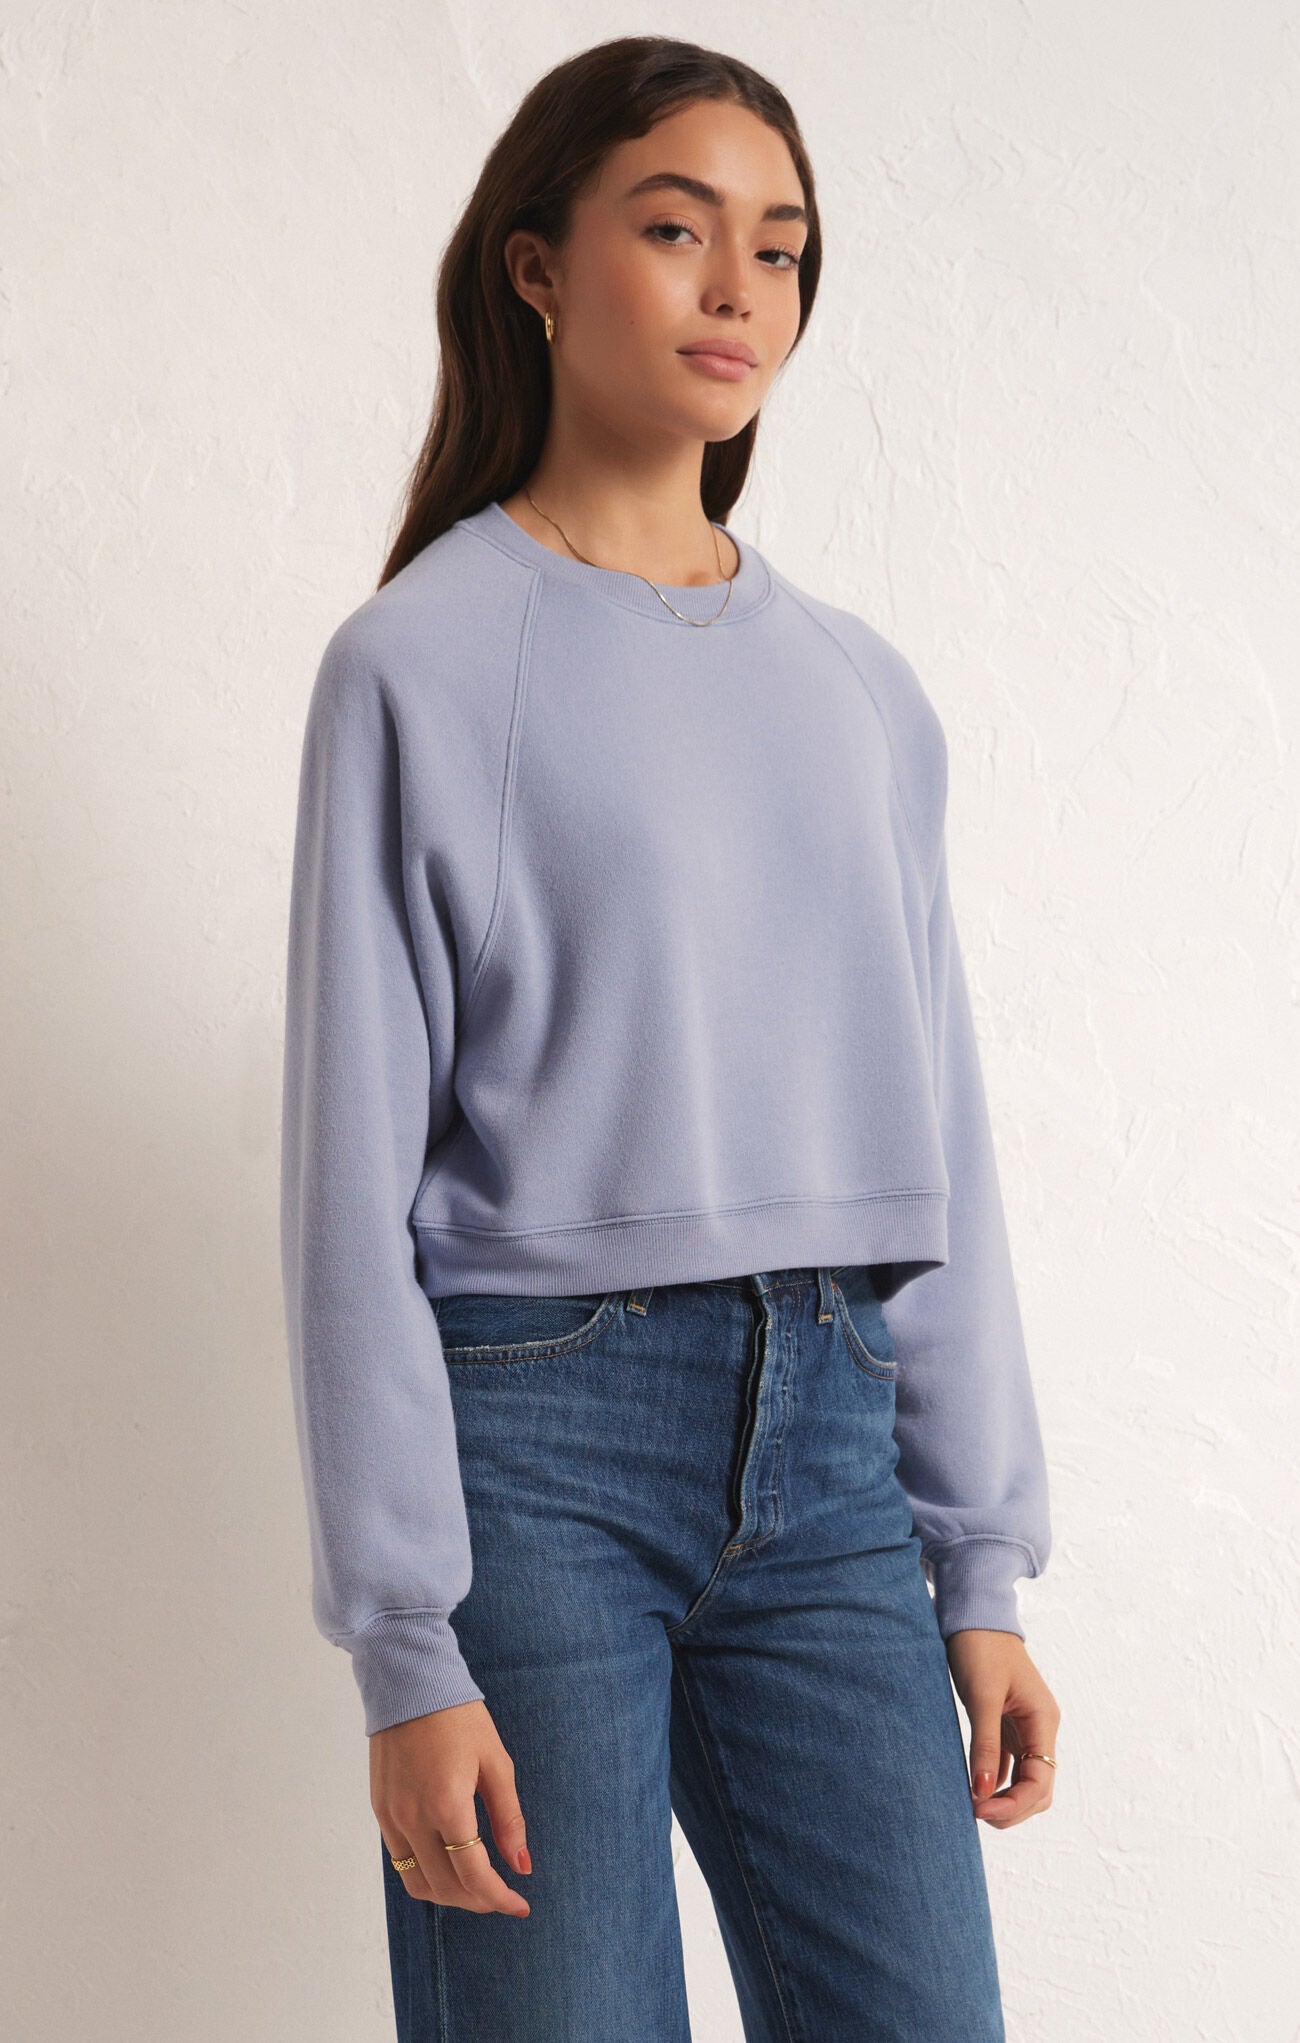 Z Supply Crop Out Stormy Sweatshirt